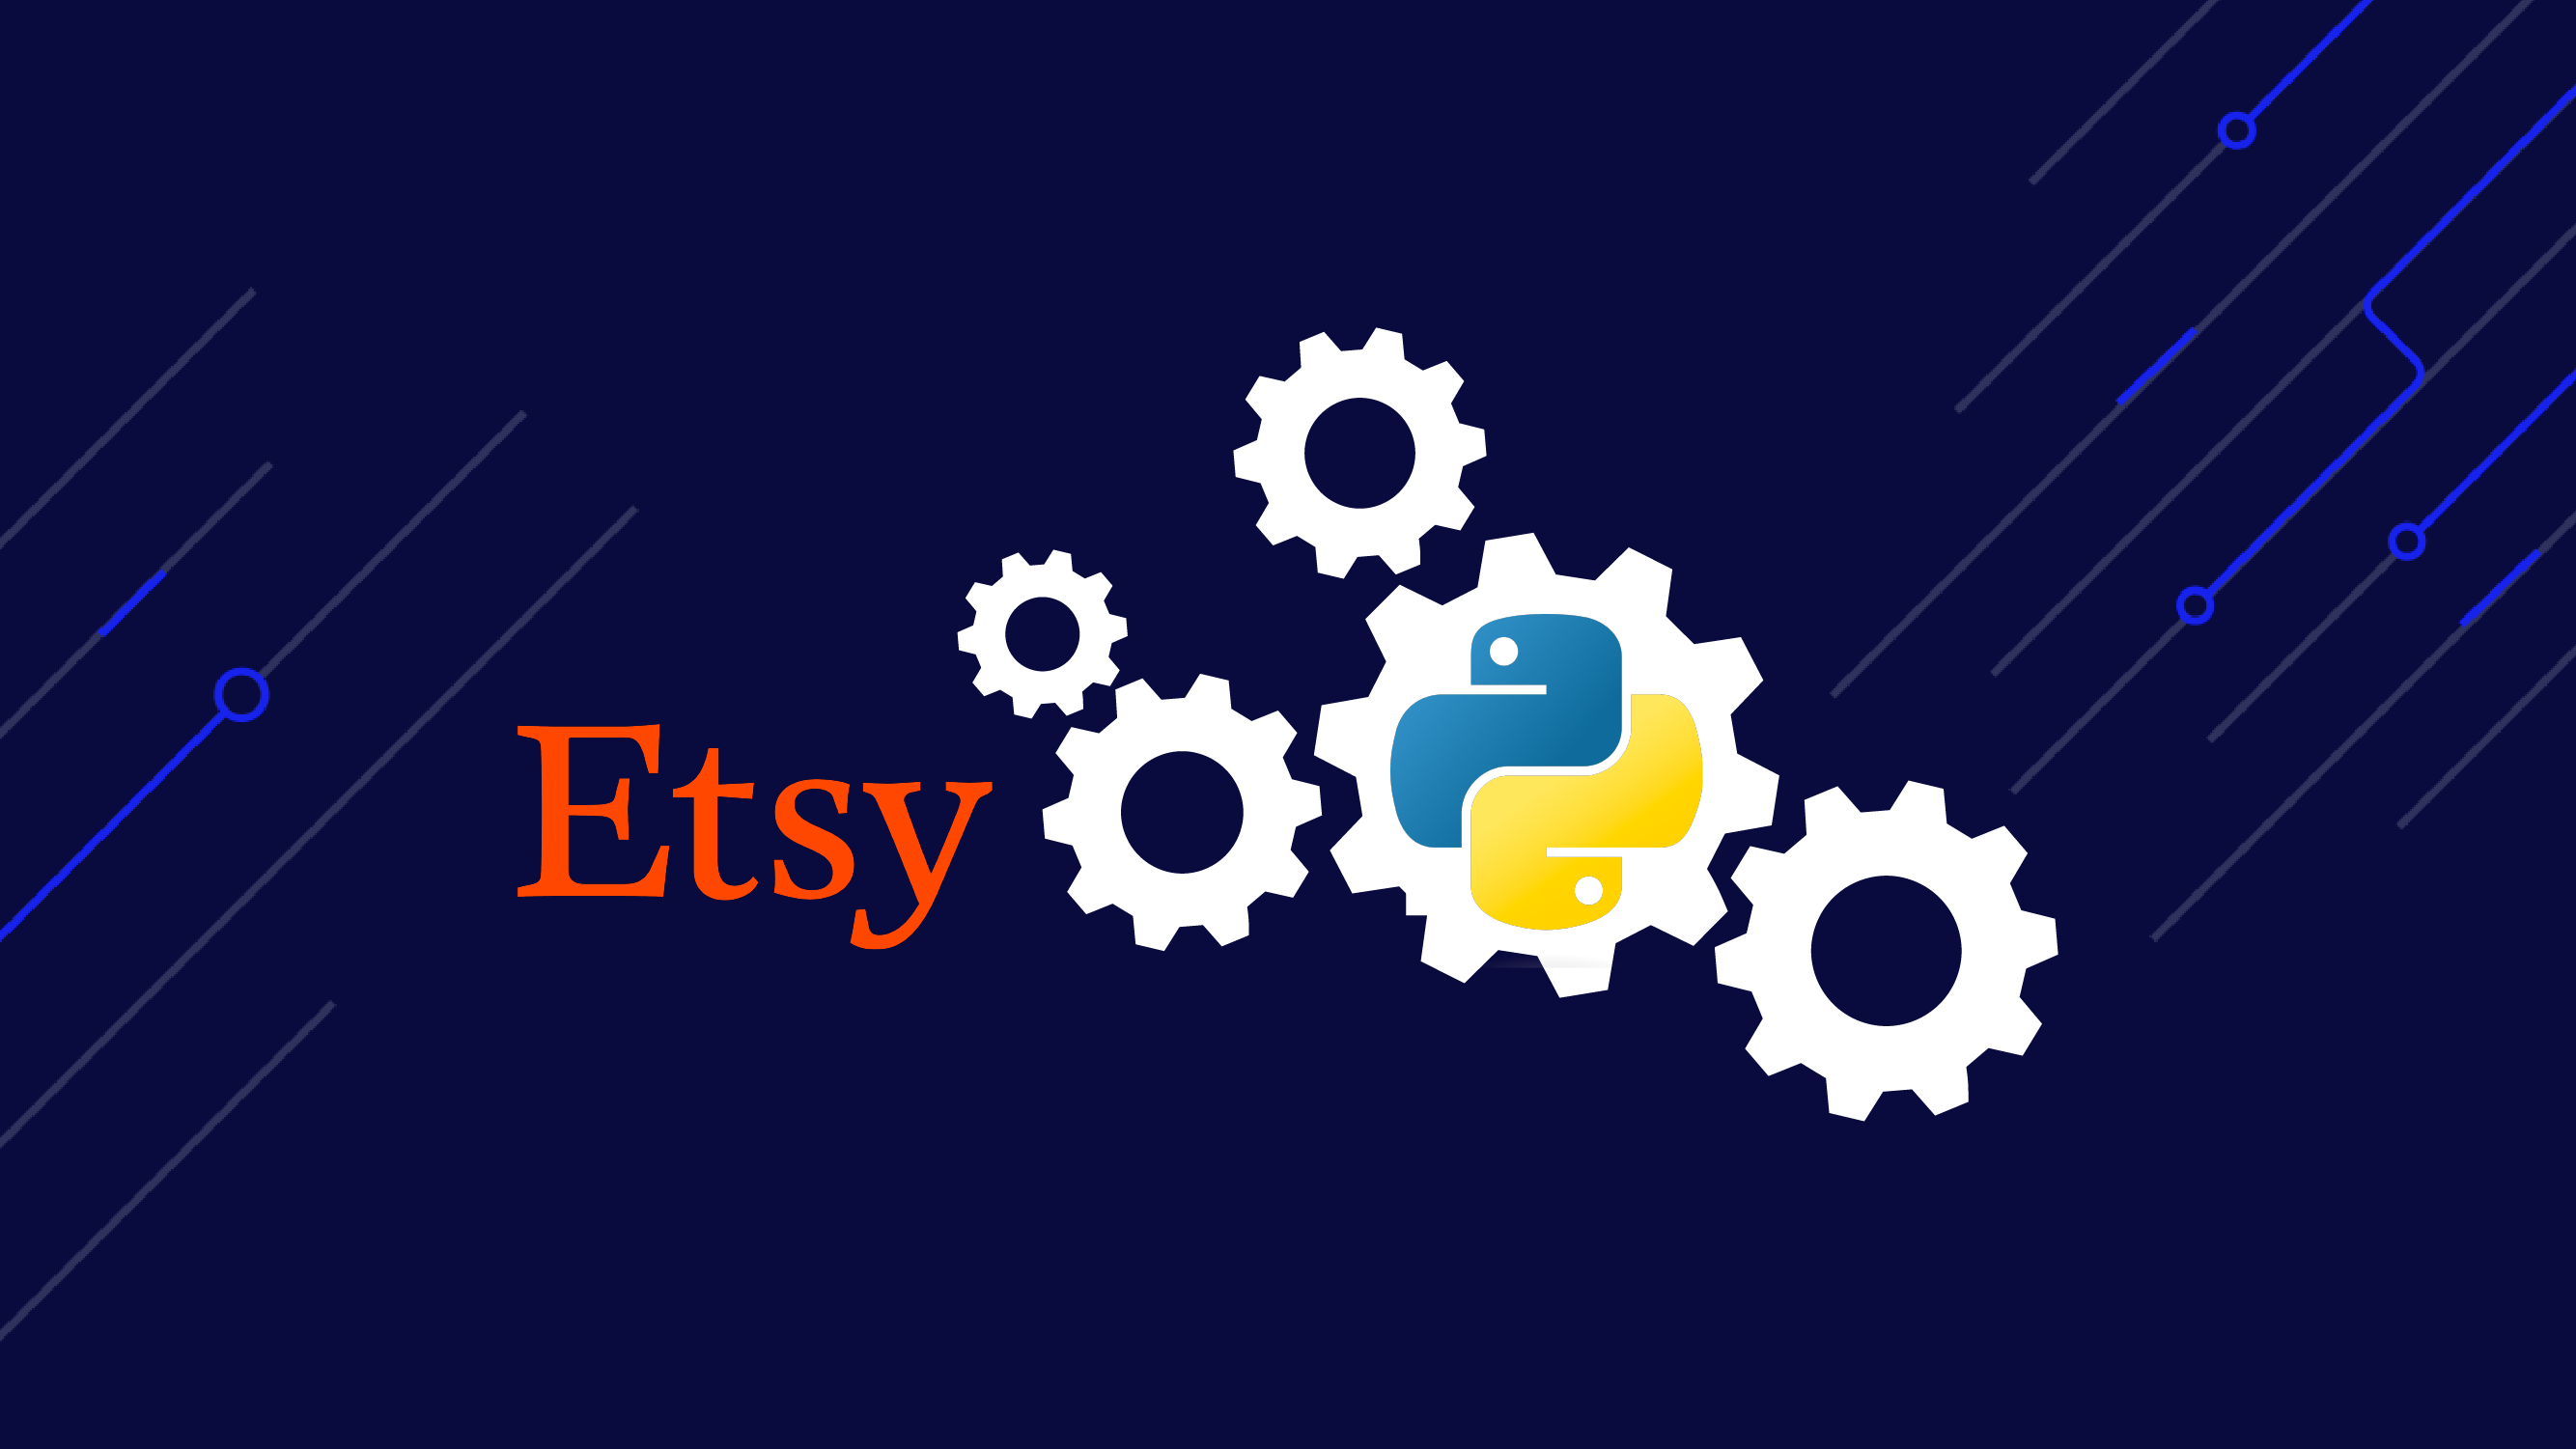 Tutorial on how to scrape Etsy product data with Python